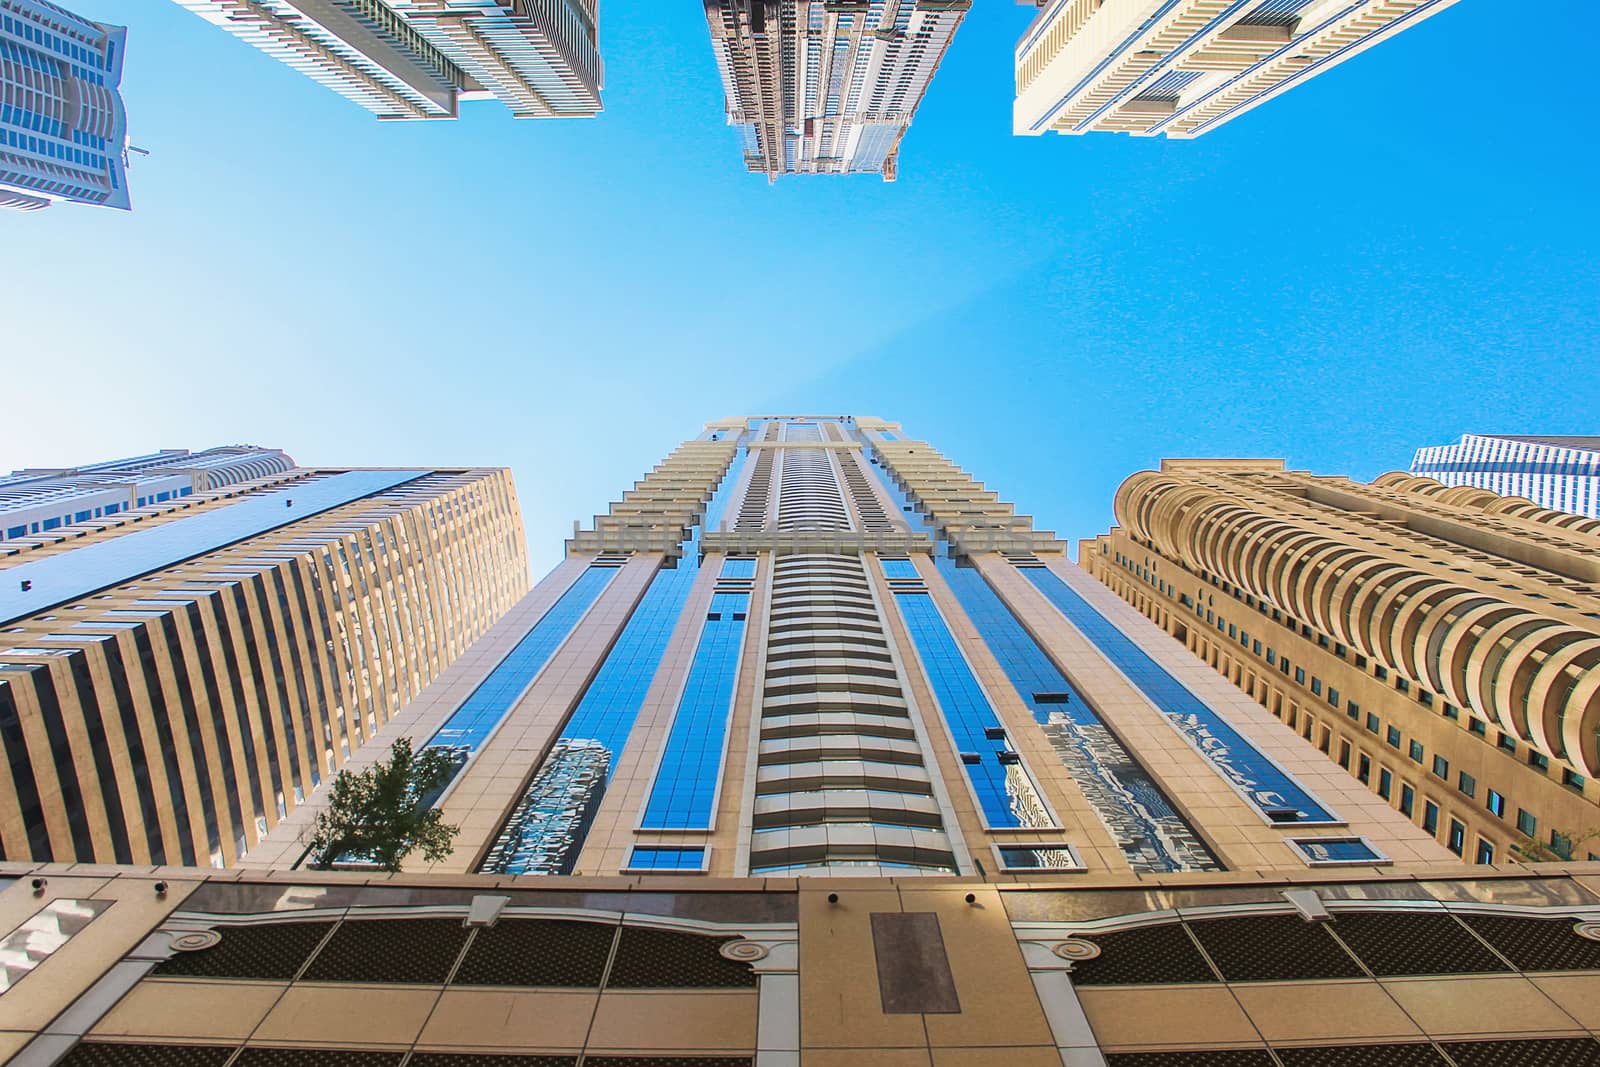 United Arab Emirates Dubai April 7, 2014, skyscrapers high rise buildings view from below against the blue sky modern architecture soft focus